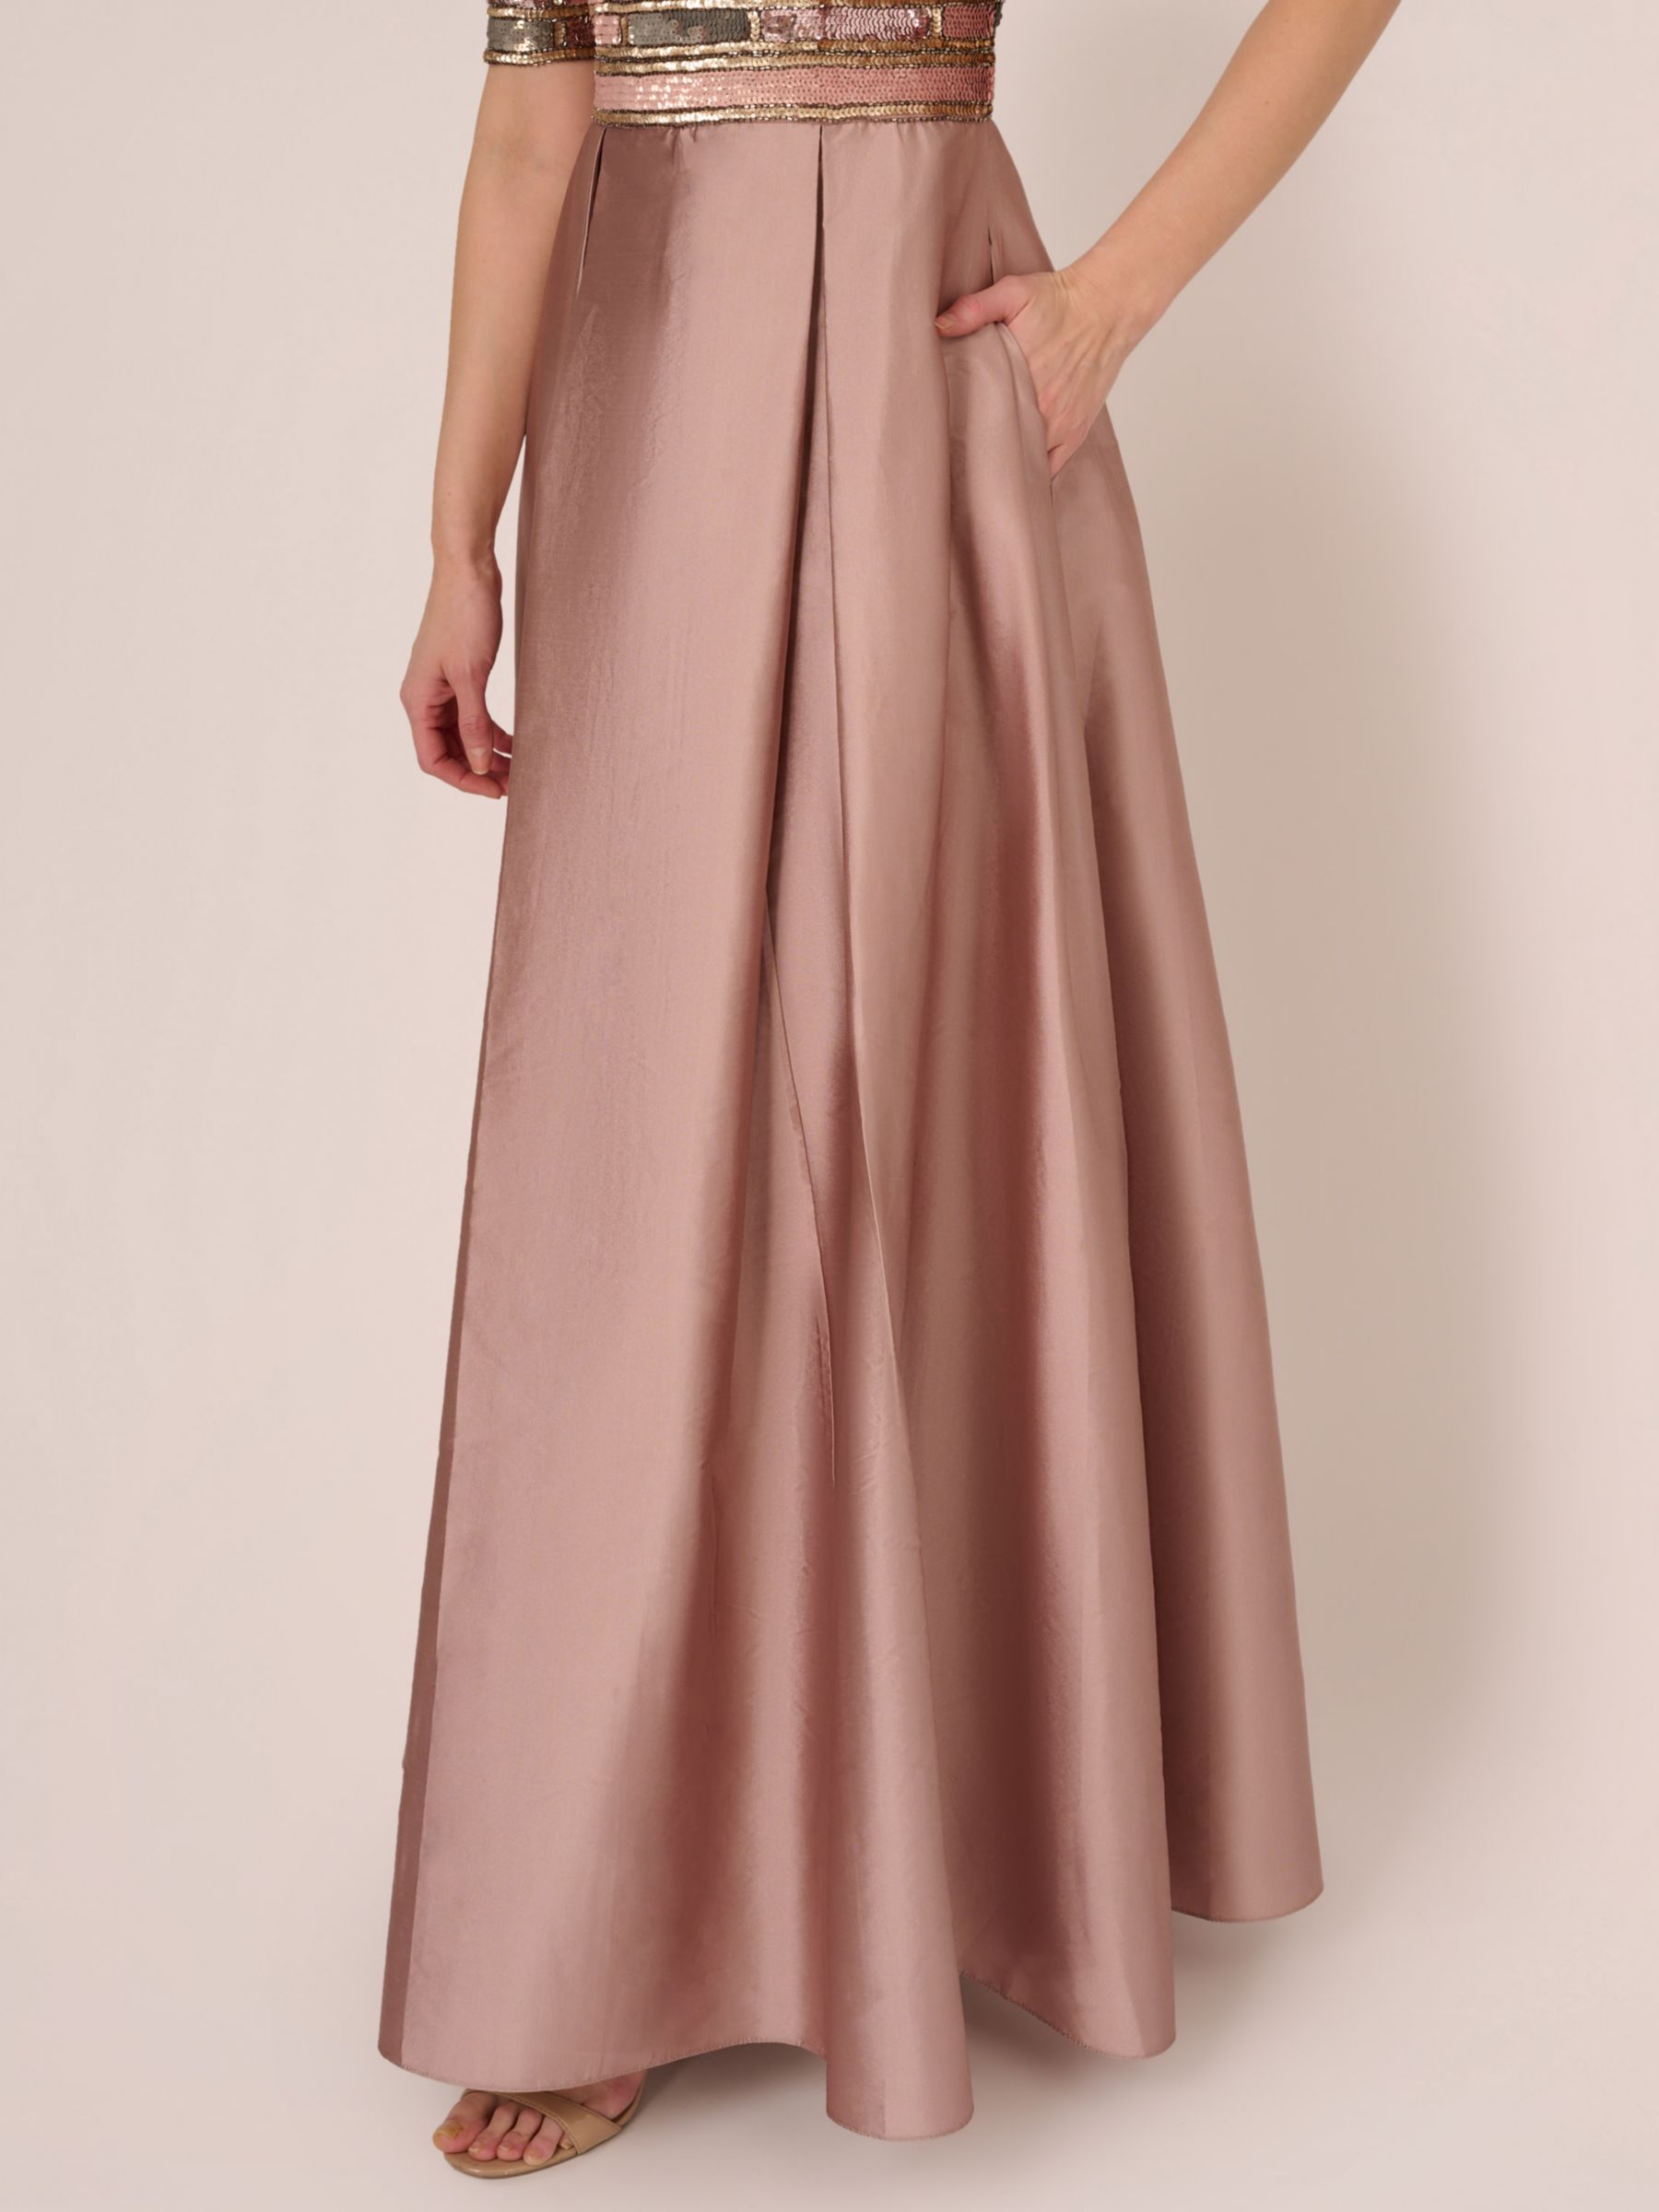 Buy Adrianna Papell Embellished Tafetta Dress Maxi Dress, Stone Online at johnlewis.com